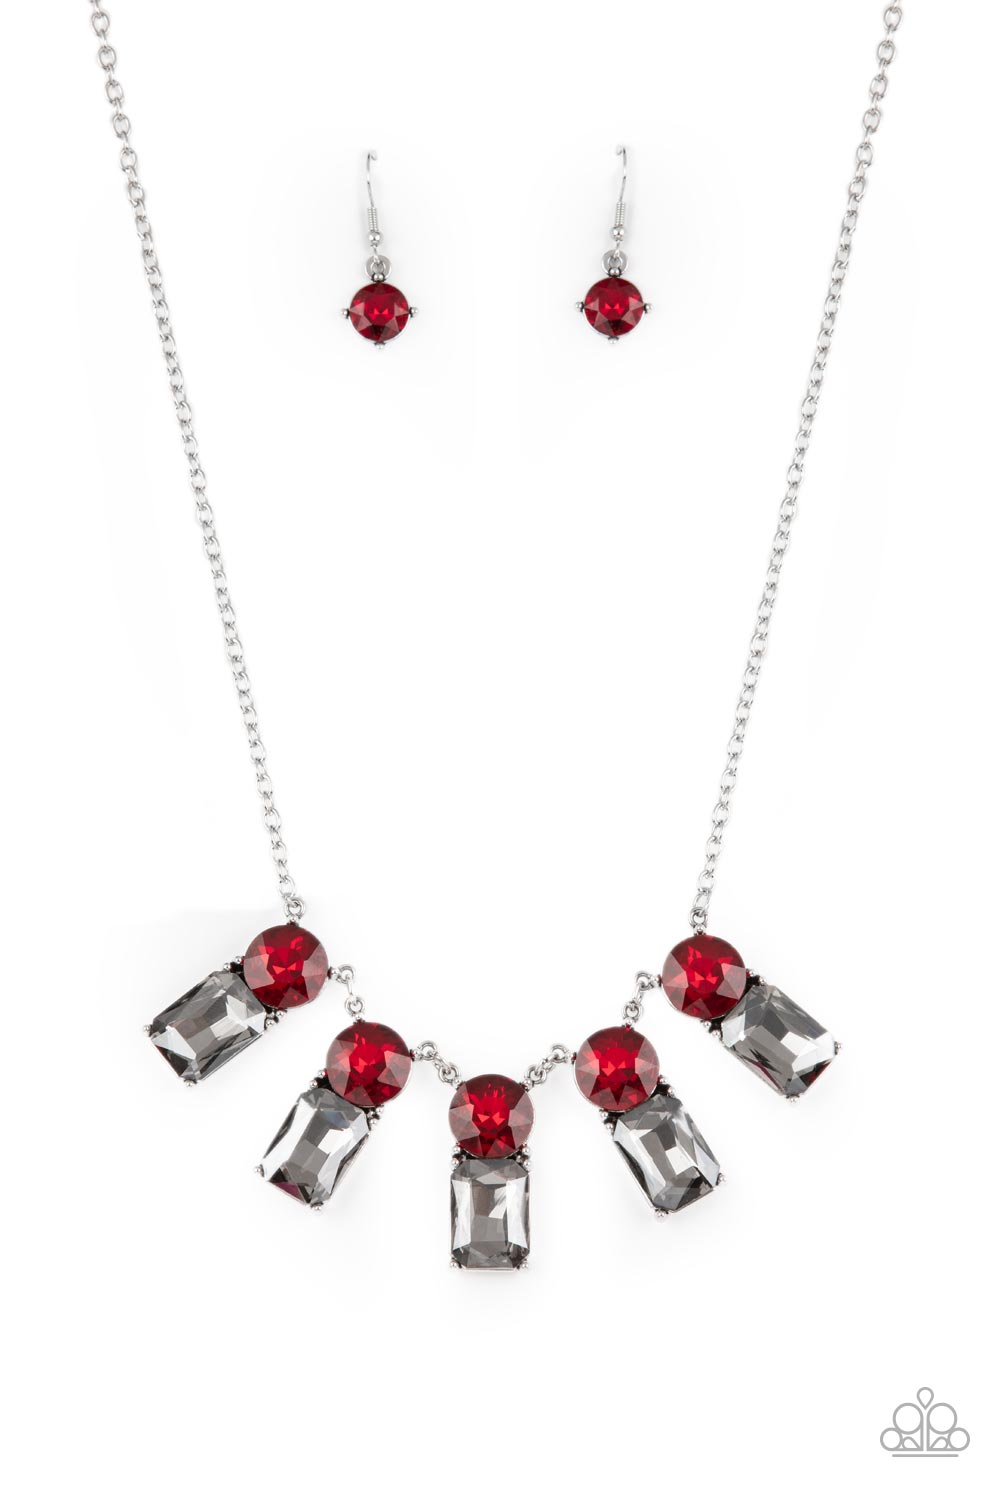 PAPARAZZI Celestial Royal - Red | Ruby Hematite Mixed Rhinestone Necklace-Paparazzi Jewelry Catalog | Gem Box Accessories Independent Consultant